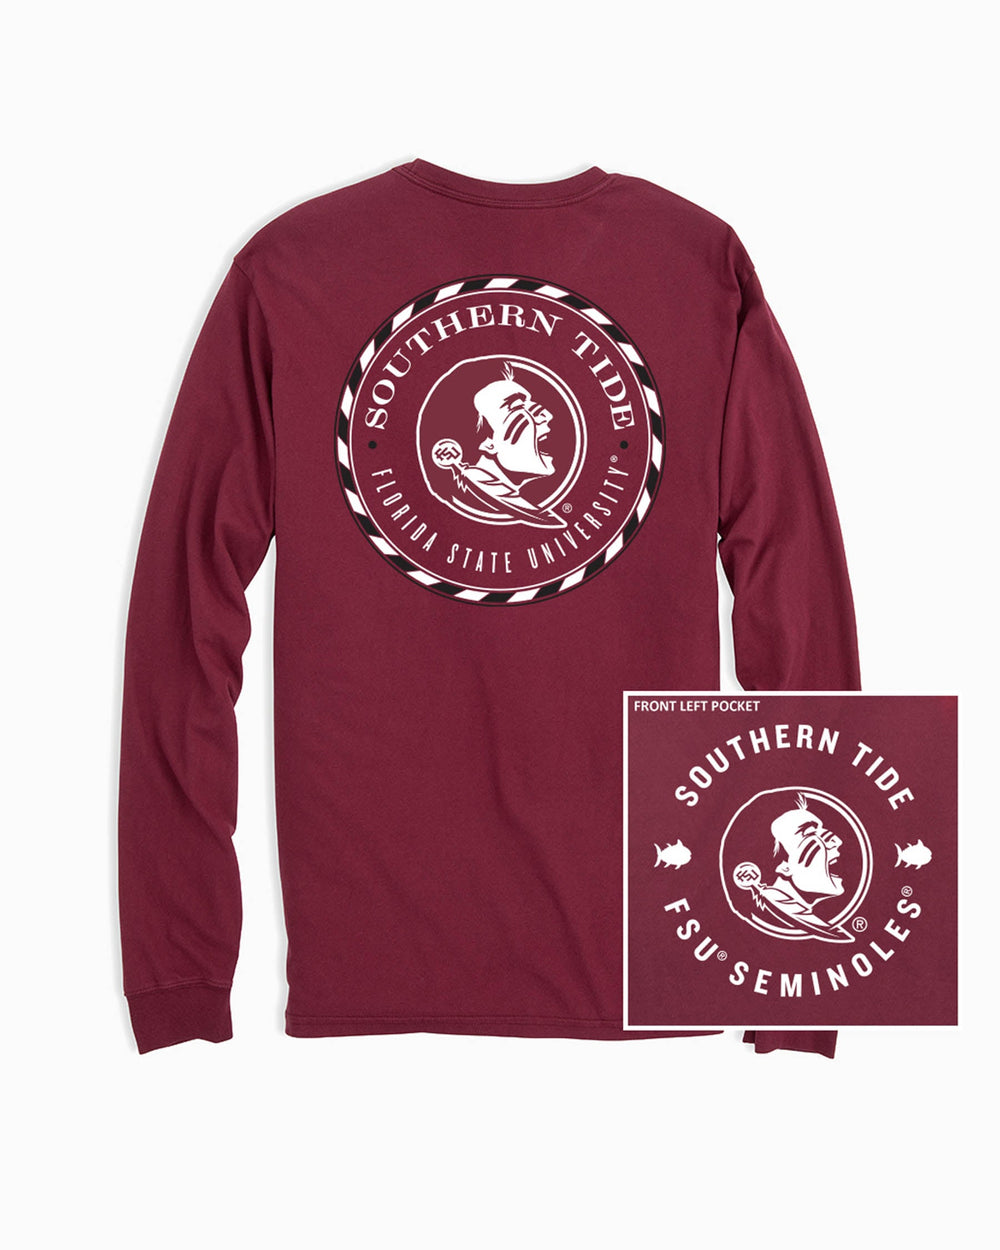 The front of the FSU Seminoles Long Sleeve Medallion Logo T-Shirt by Southern Tide - Chianti